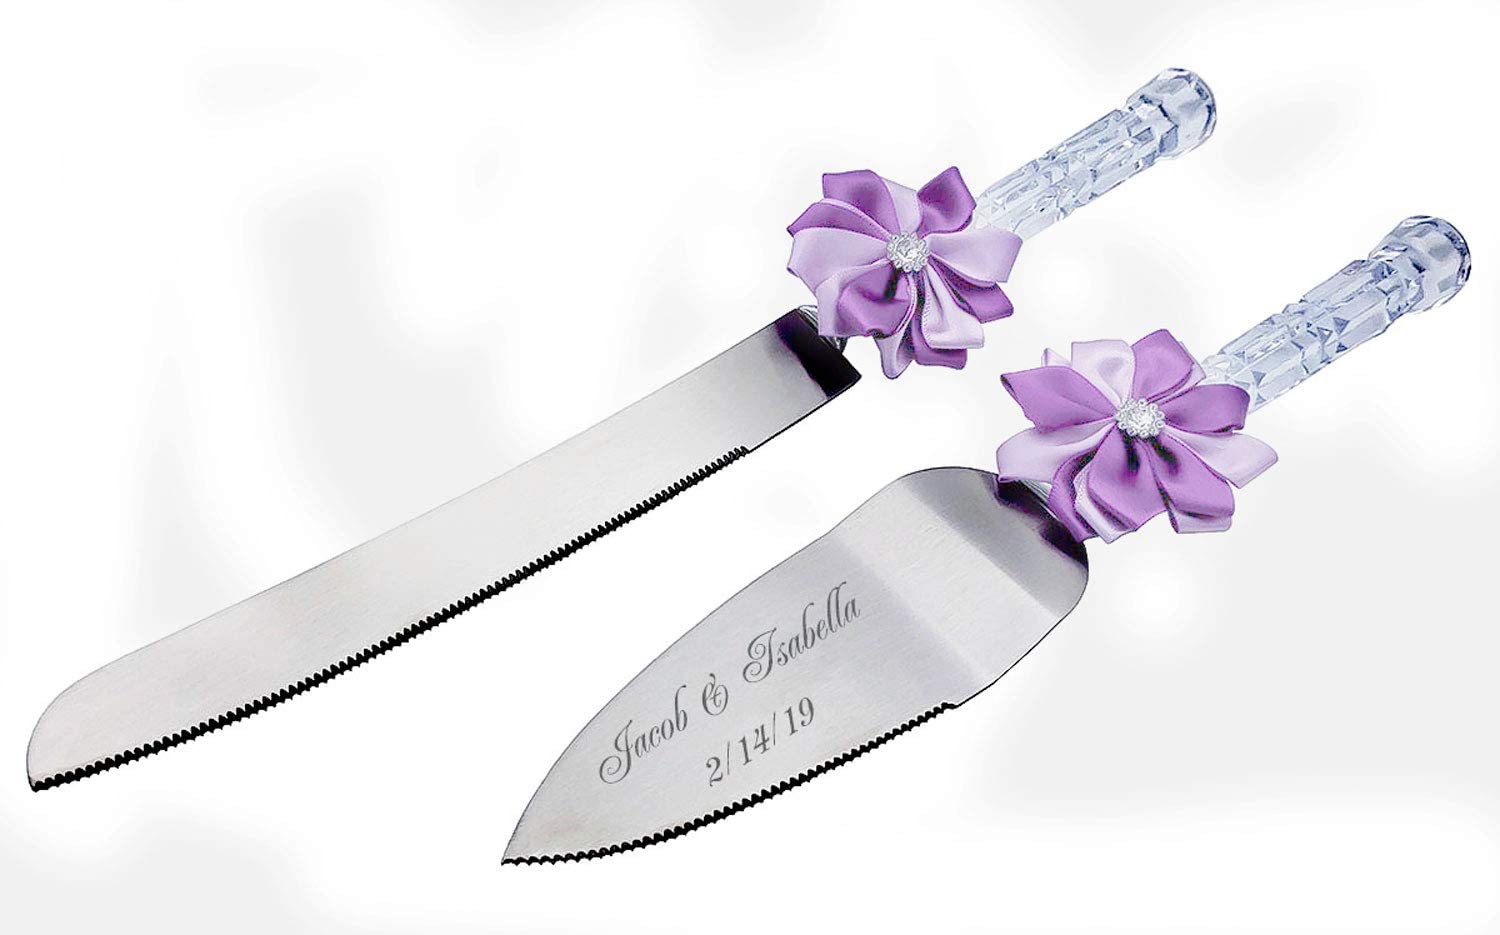 GIFTS INFINITY - Personalized Wedding Cake Knife & Server Set with Purple flower bow